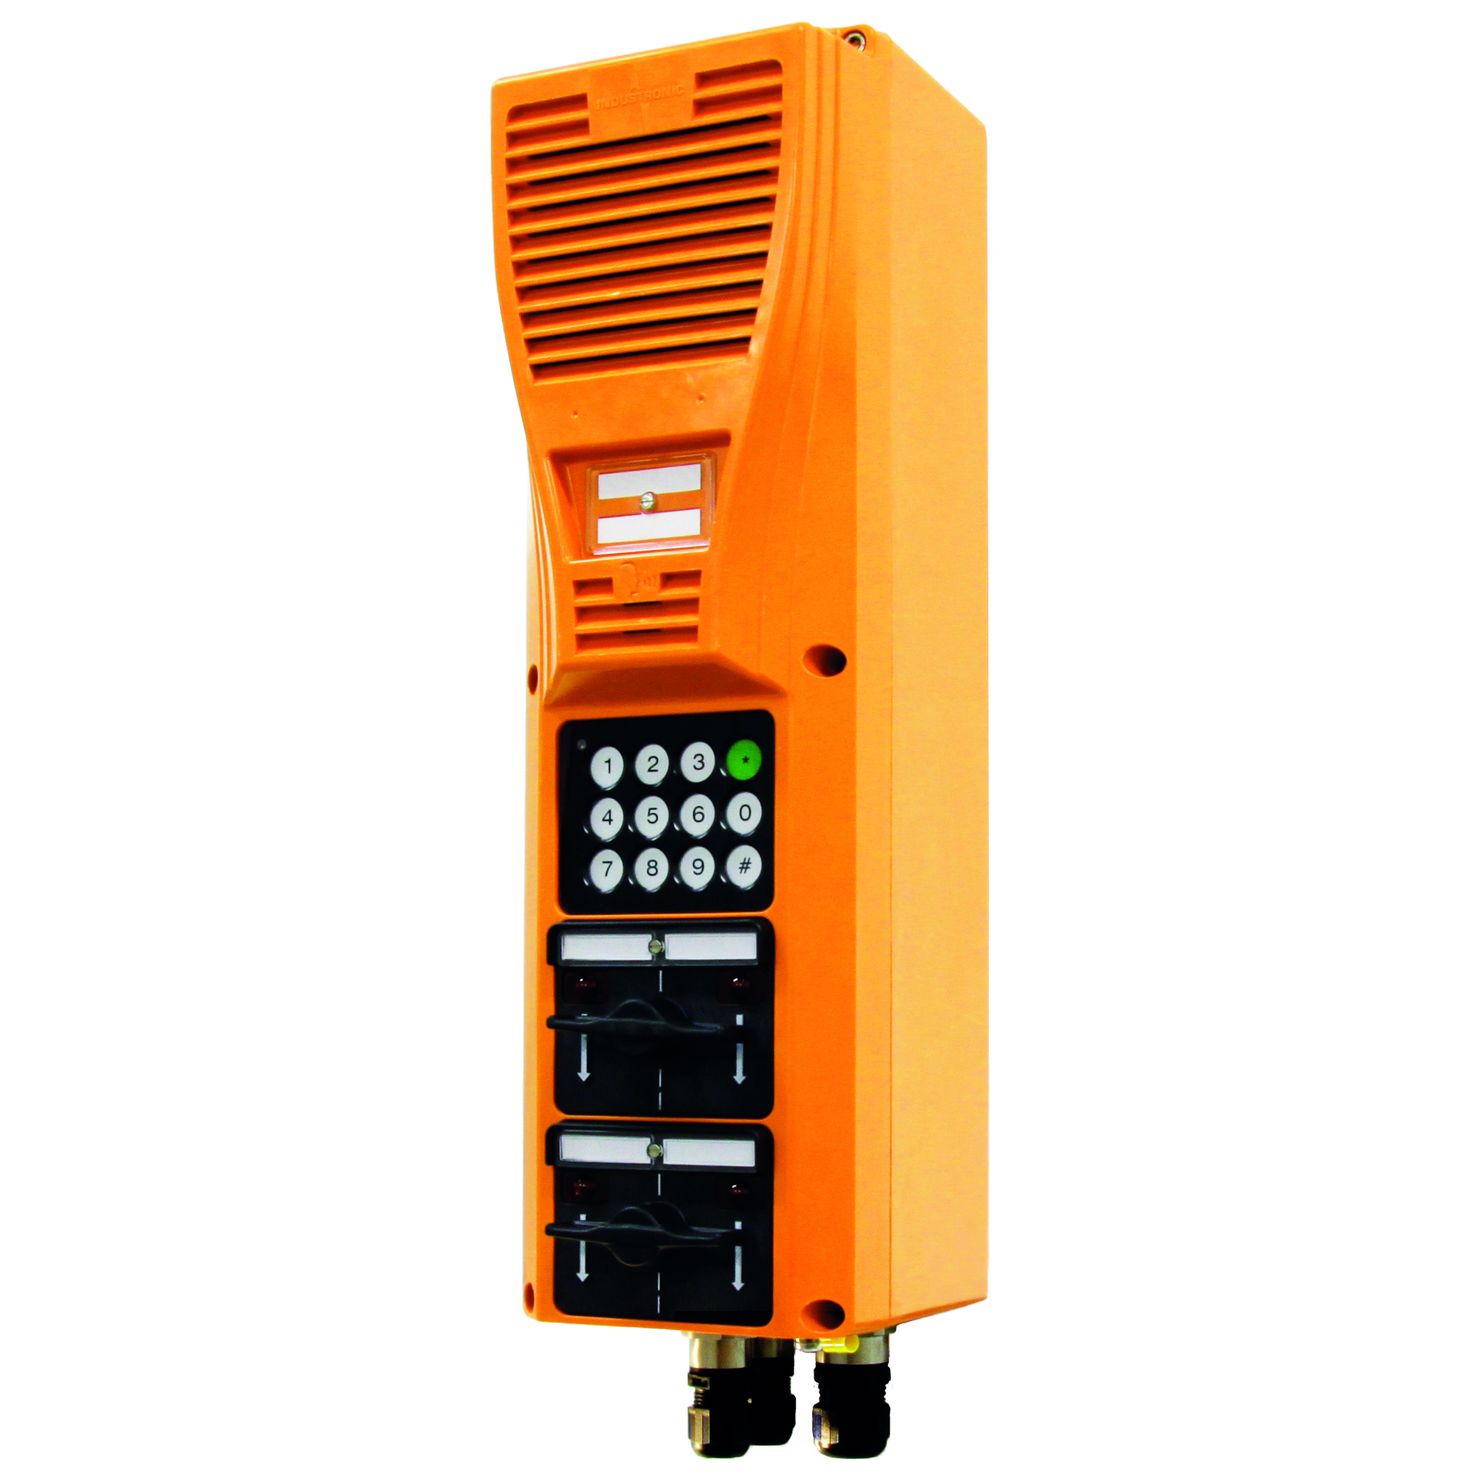 "Digital explosion-proof Intercom Station for use in explosive areas of Ex zone 1 and 2 with dial keypad and momentary rocker switch"